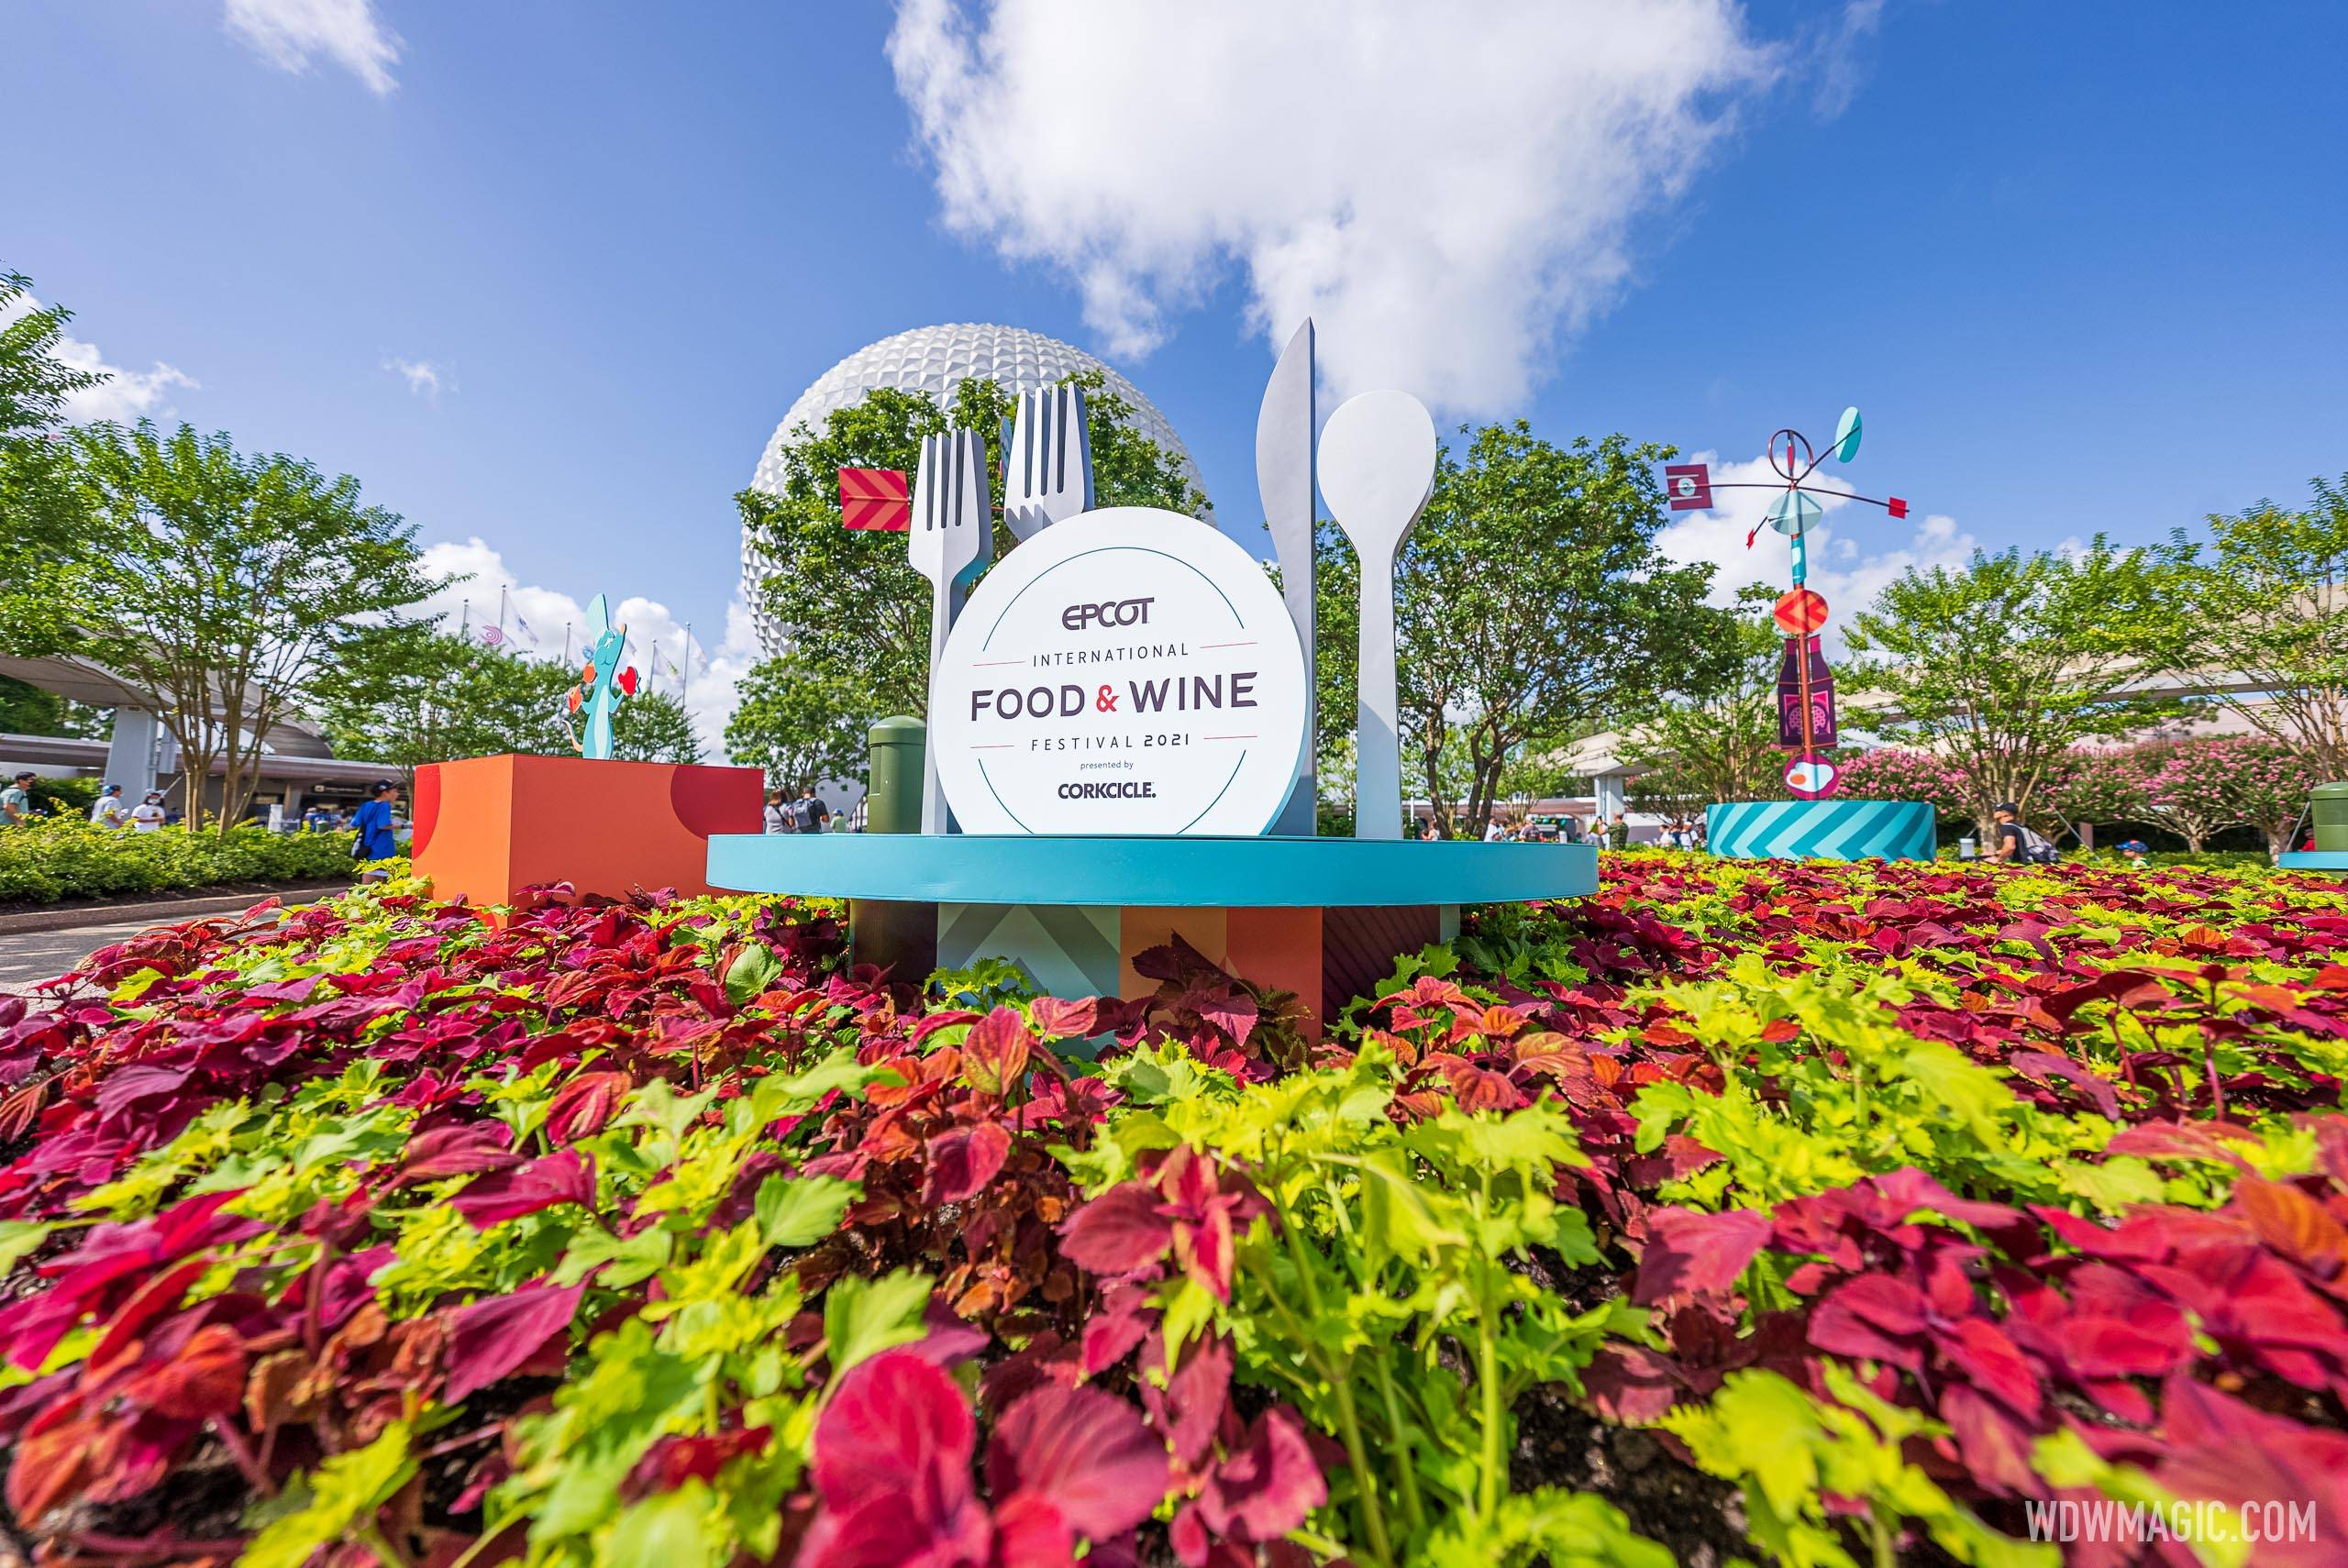 CORKCICLE is the sponsor of the 2021 EPCOT Food and Wine Festival